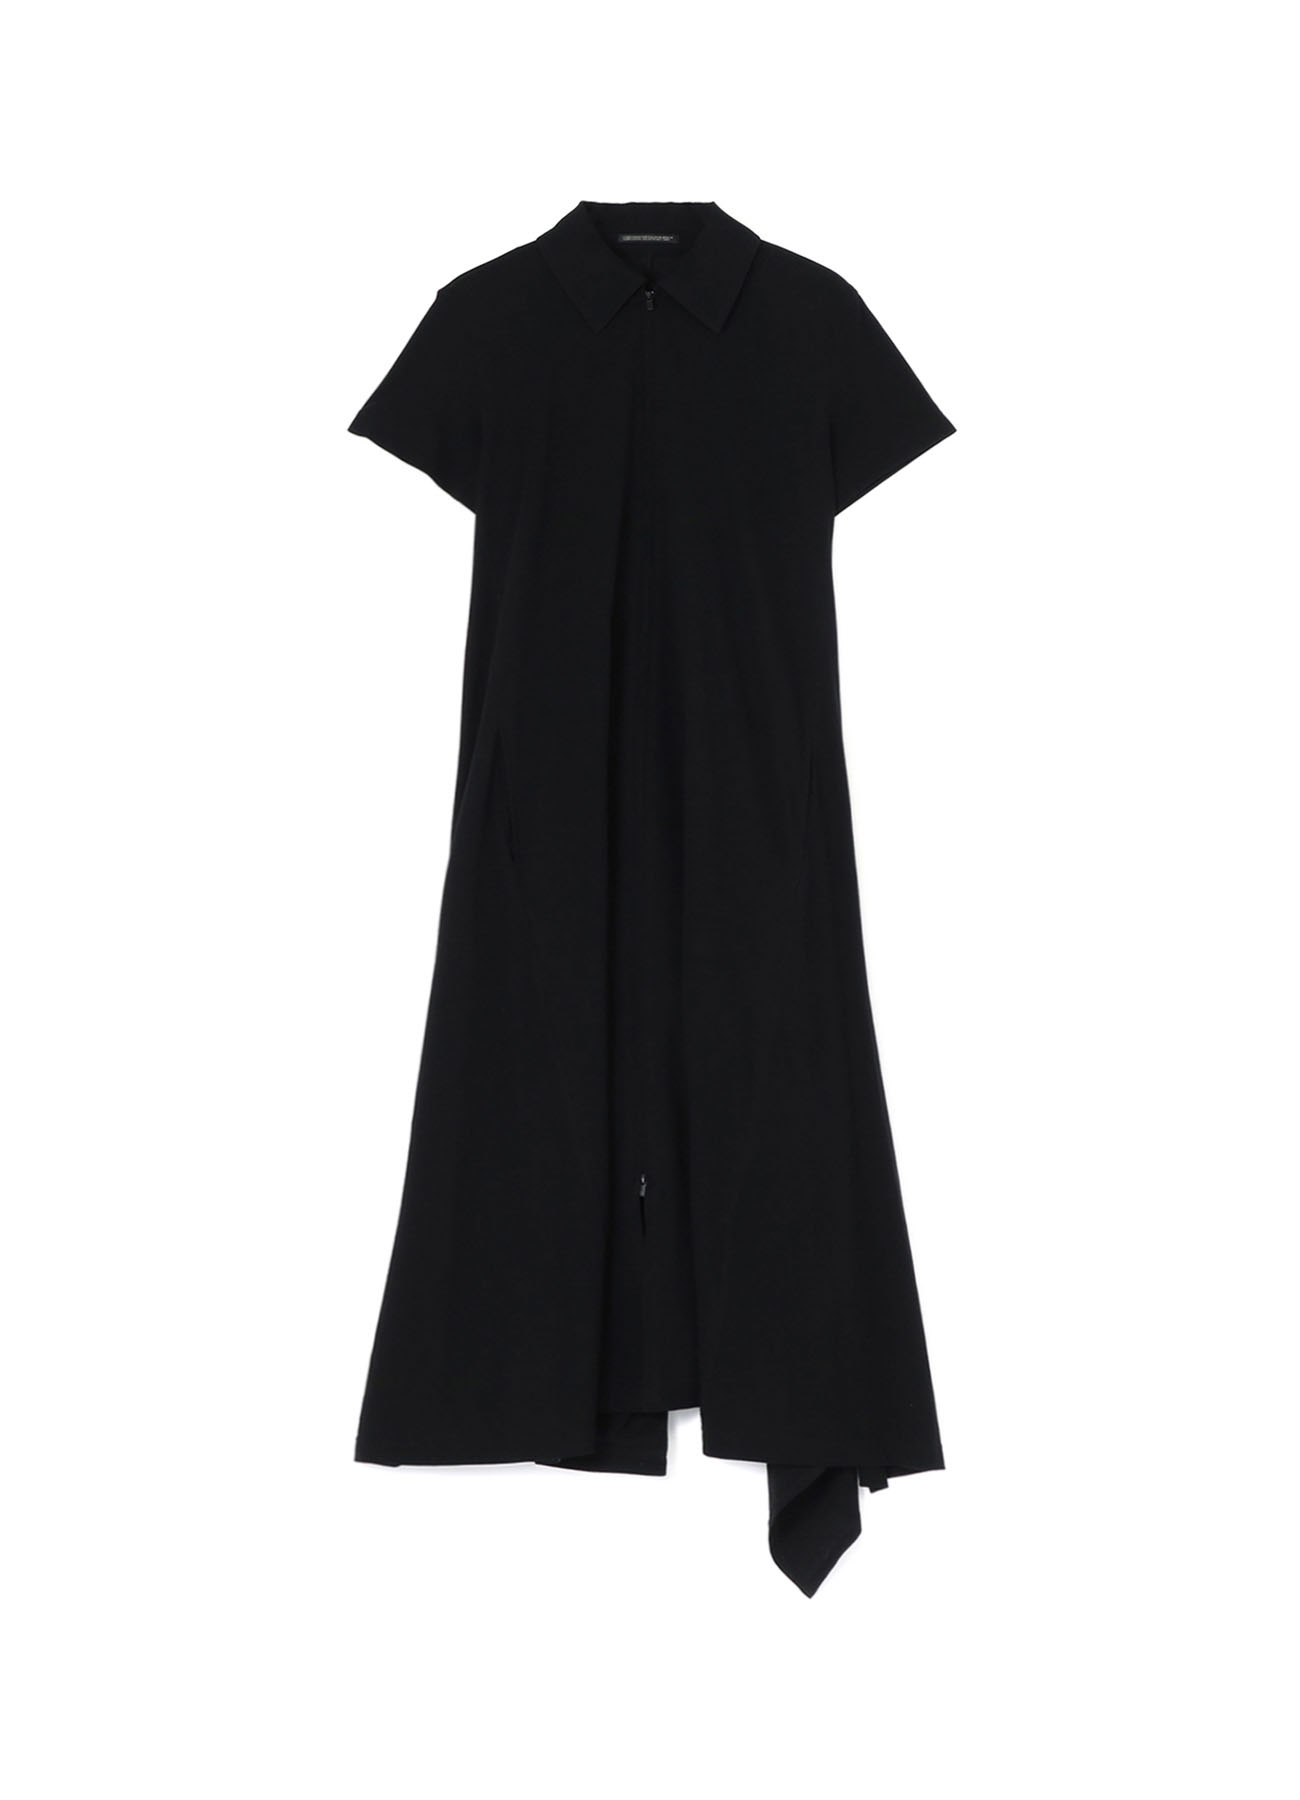 【Launching 10:00(JST), March 29th】TECHNORAMA COTTON DRESS WITH LEFT REAR DRAPE DETAIL